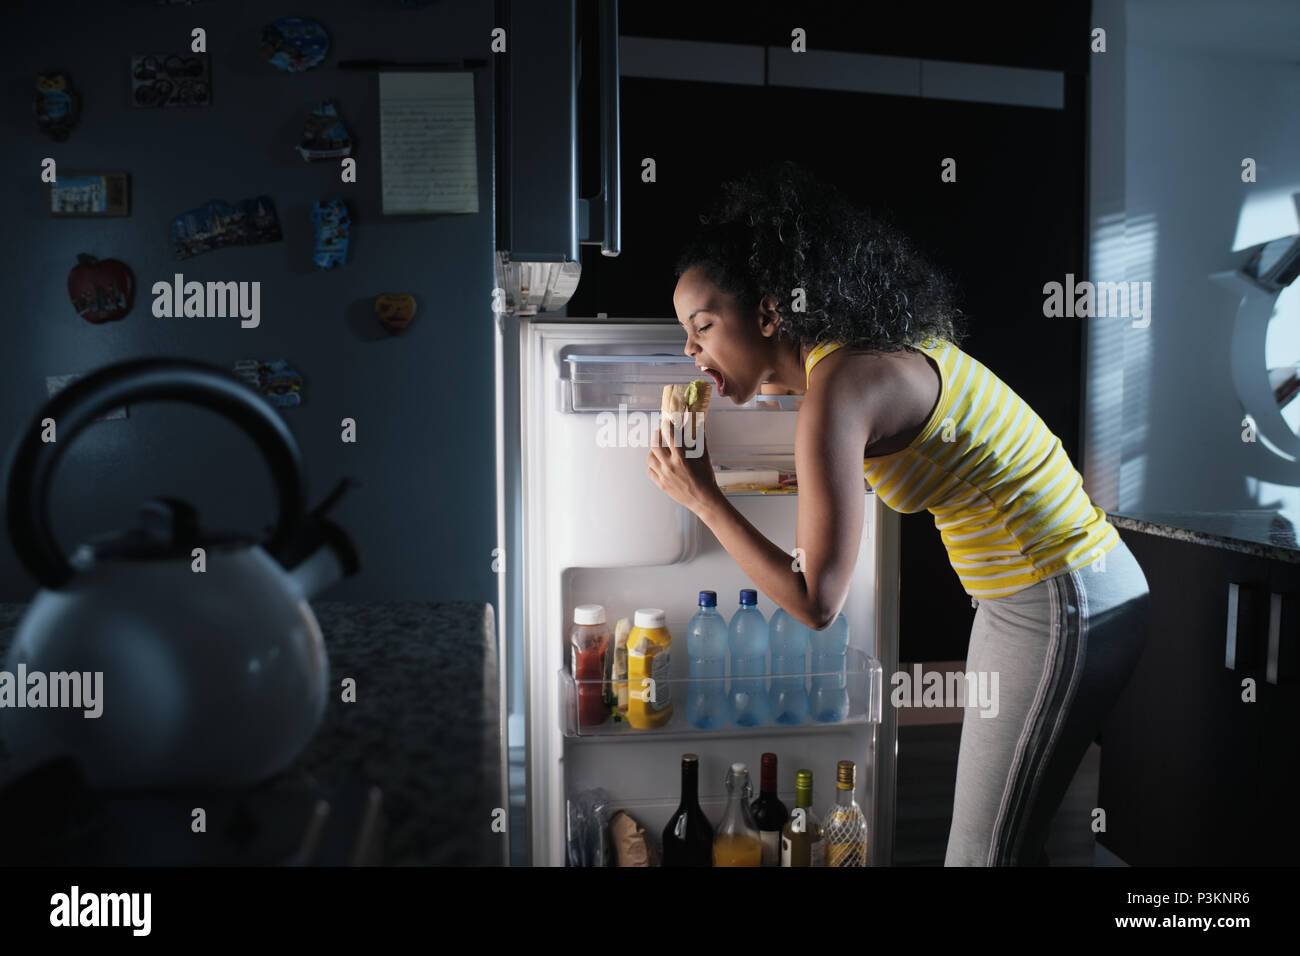 Black Woman Looking into Fridge For Midnight Snack Stock Photo